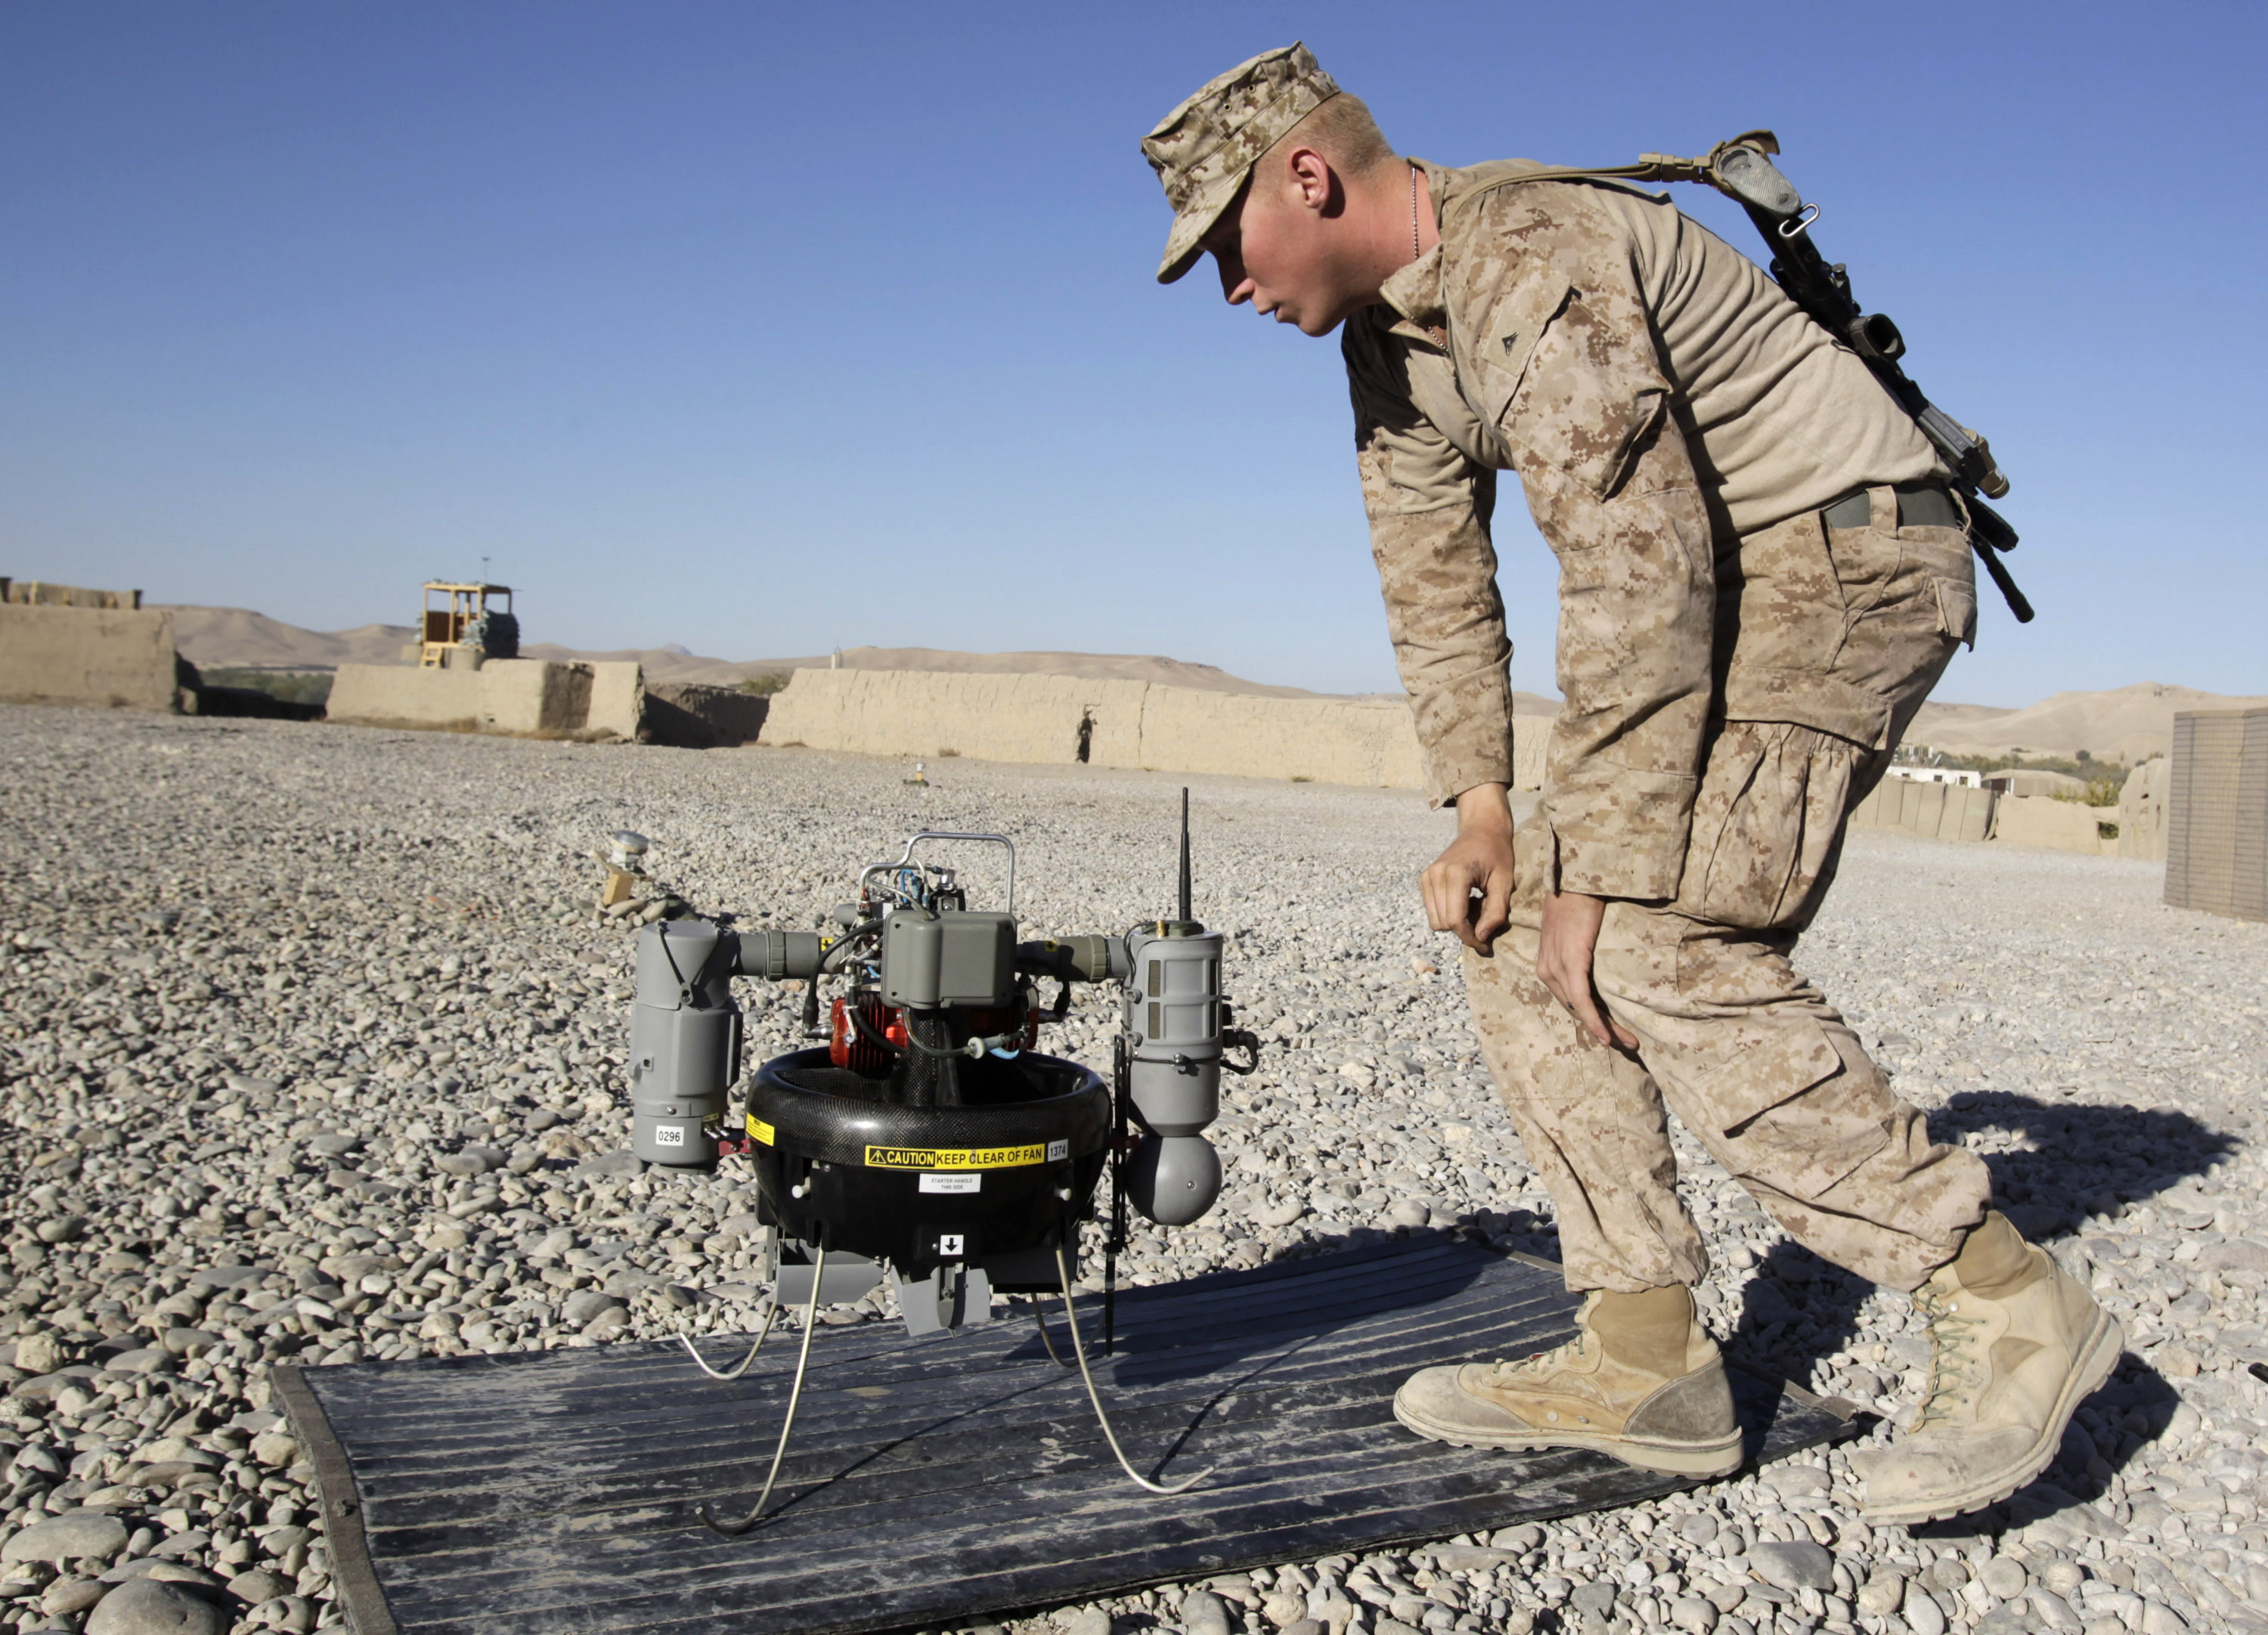 Why Drones Work: The Case for Washington's Weapon of Choice | Brookings